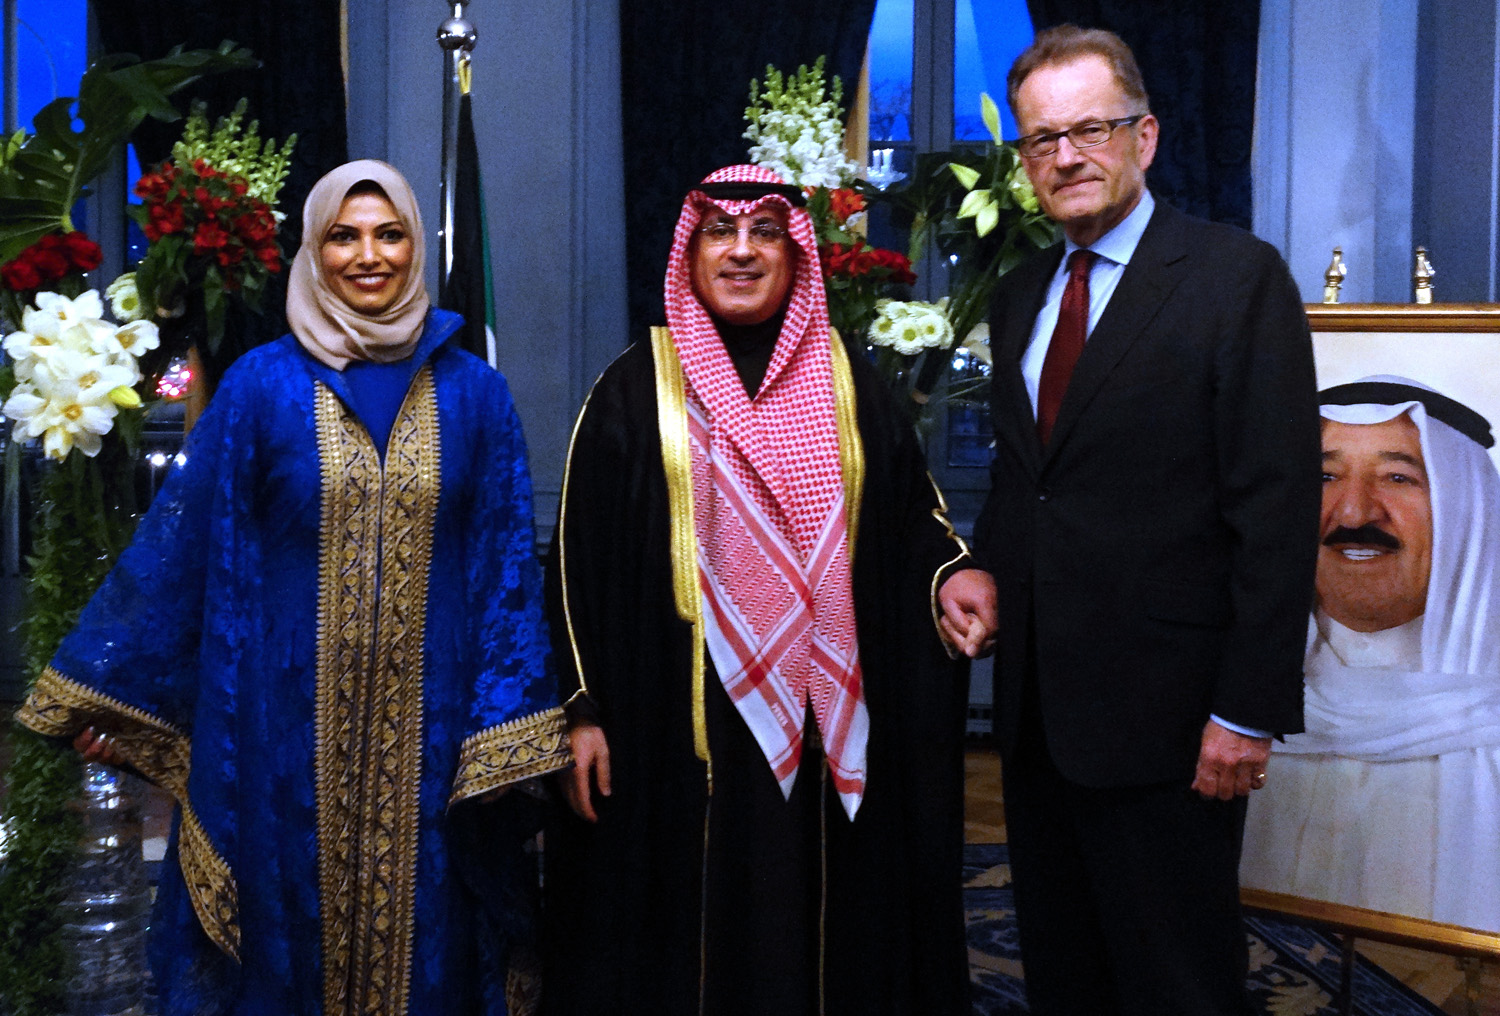 Kuwait's Permanent Delegate to the UN and International Organizations in Geneva Ambassador Jamal Al-Ghunaim and his wife during the reception Acting Director-General of the UN Office at Geneva (UNOG) Michael Moller